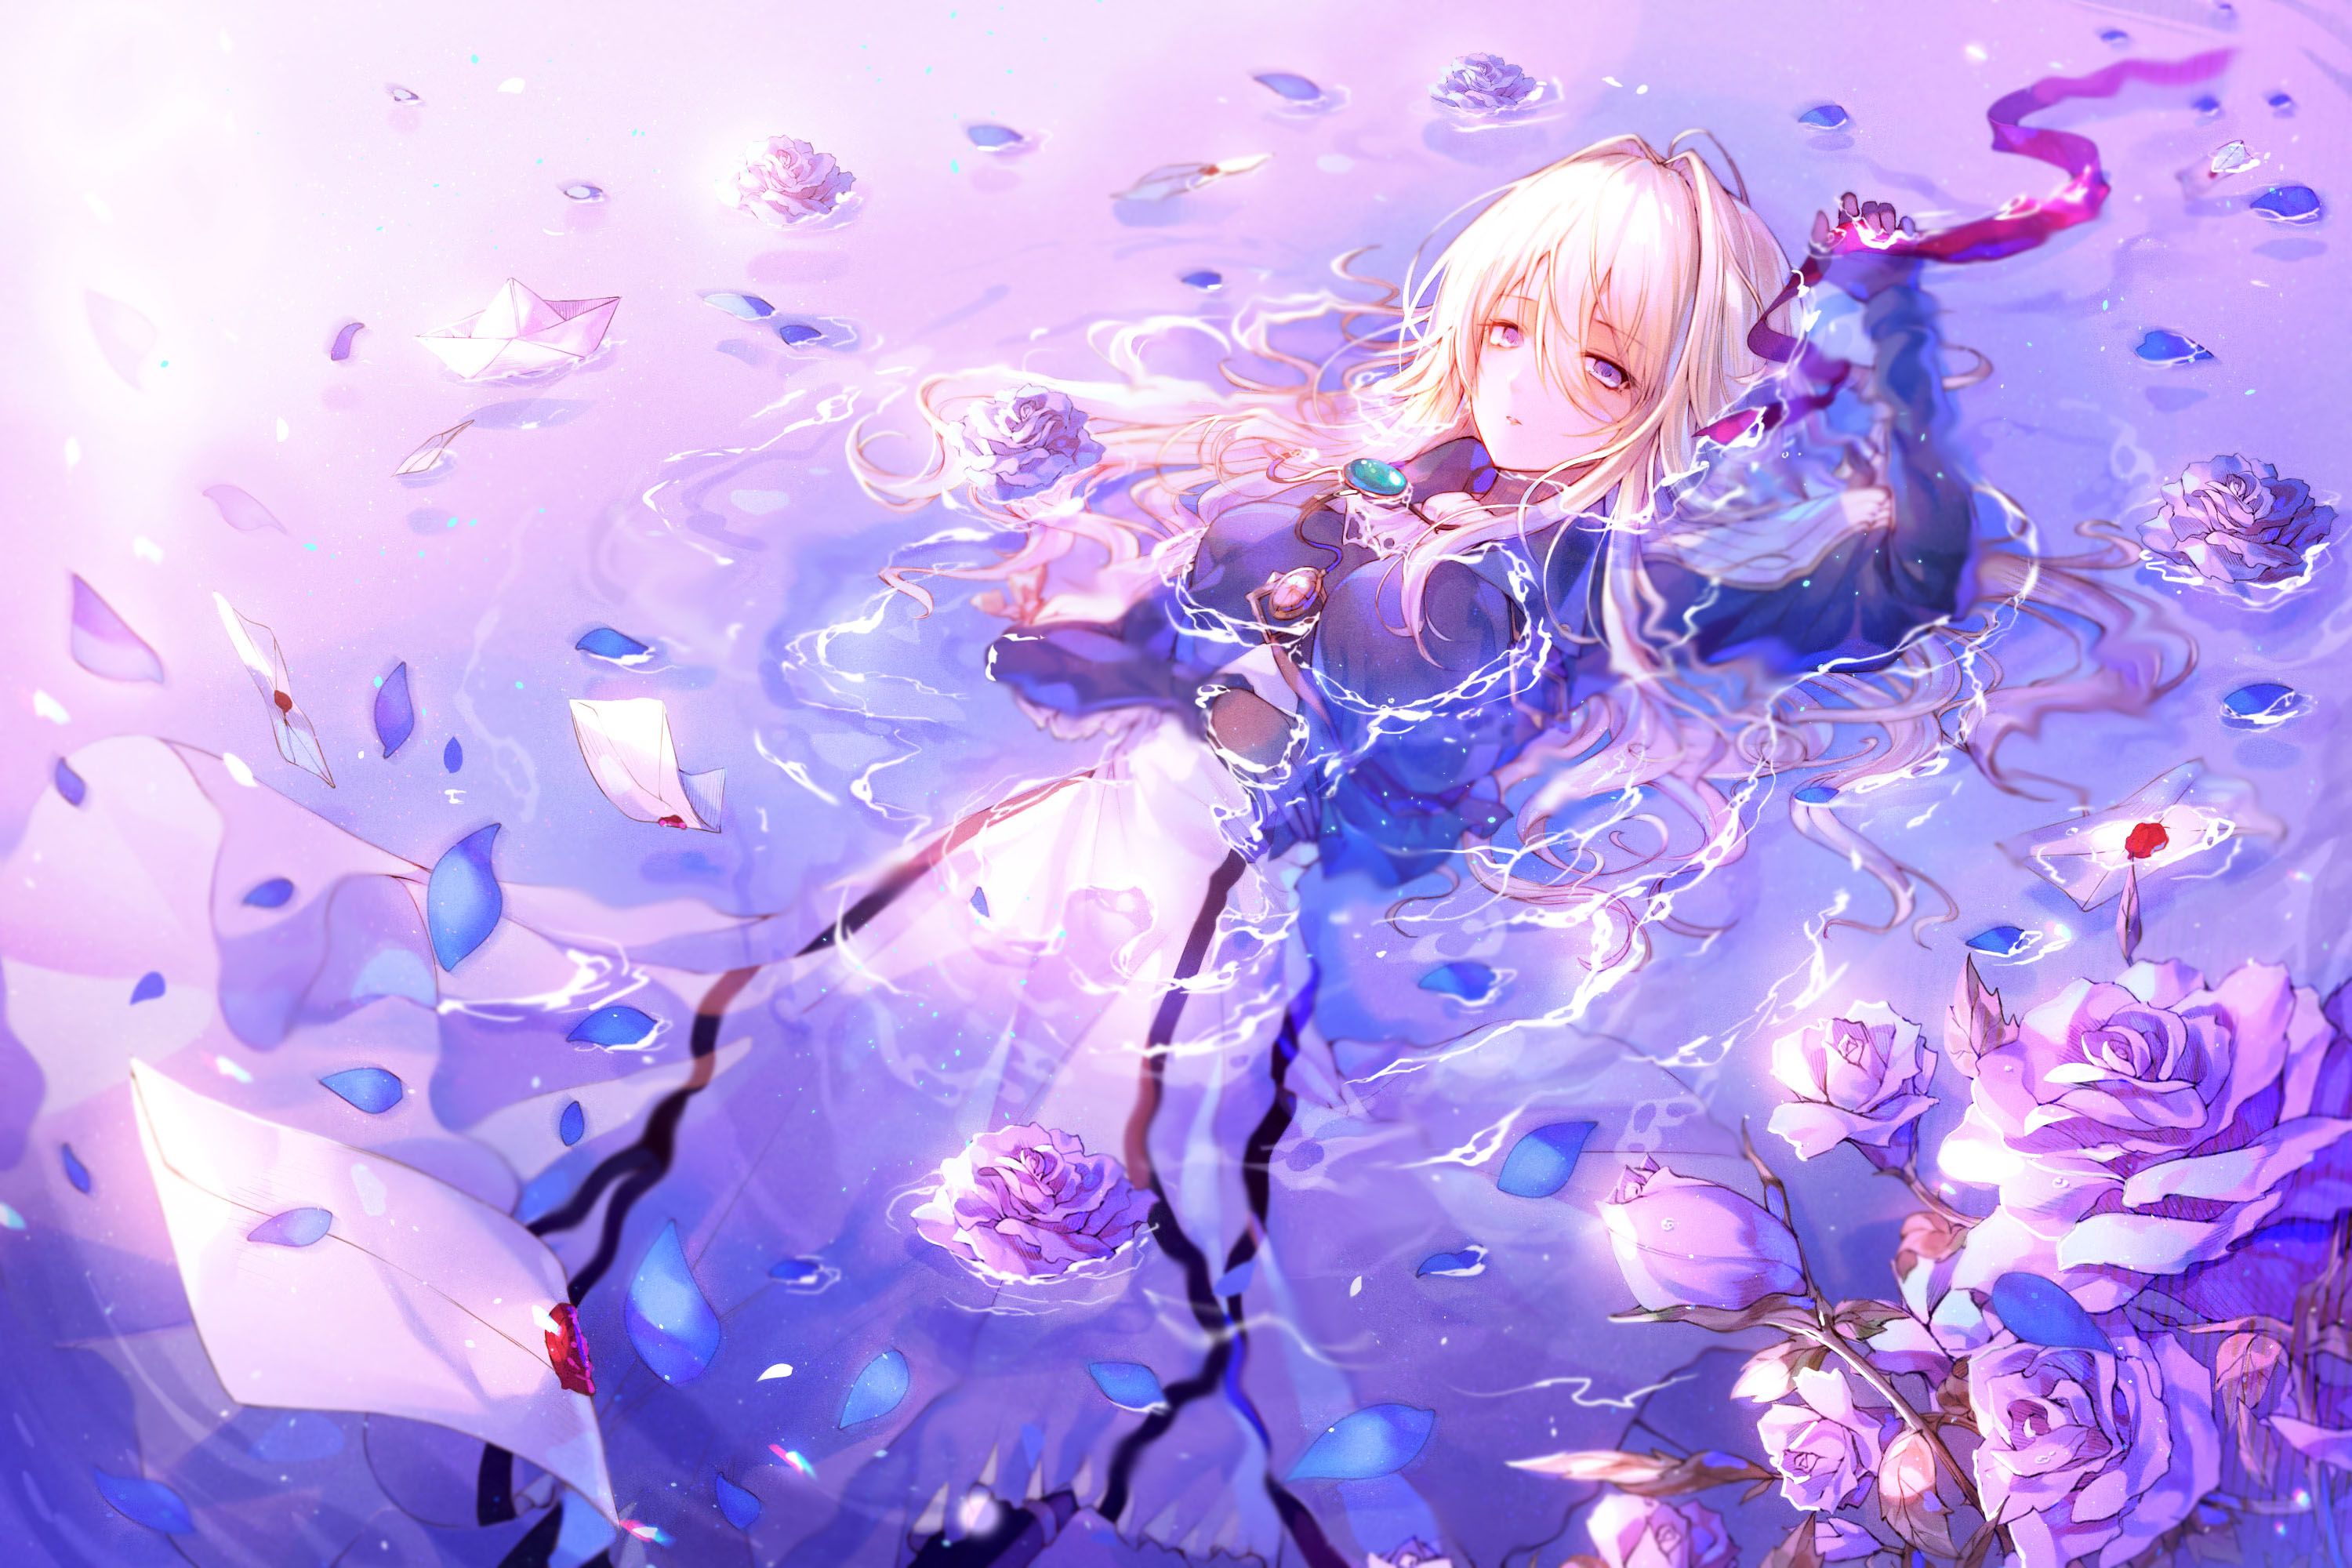 Download wallpaper from anime Violet Evergarden with tags: Windows 8